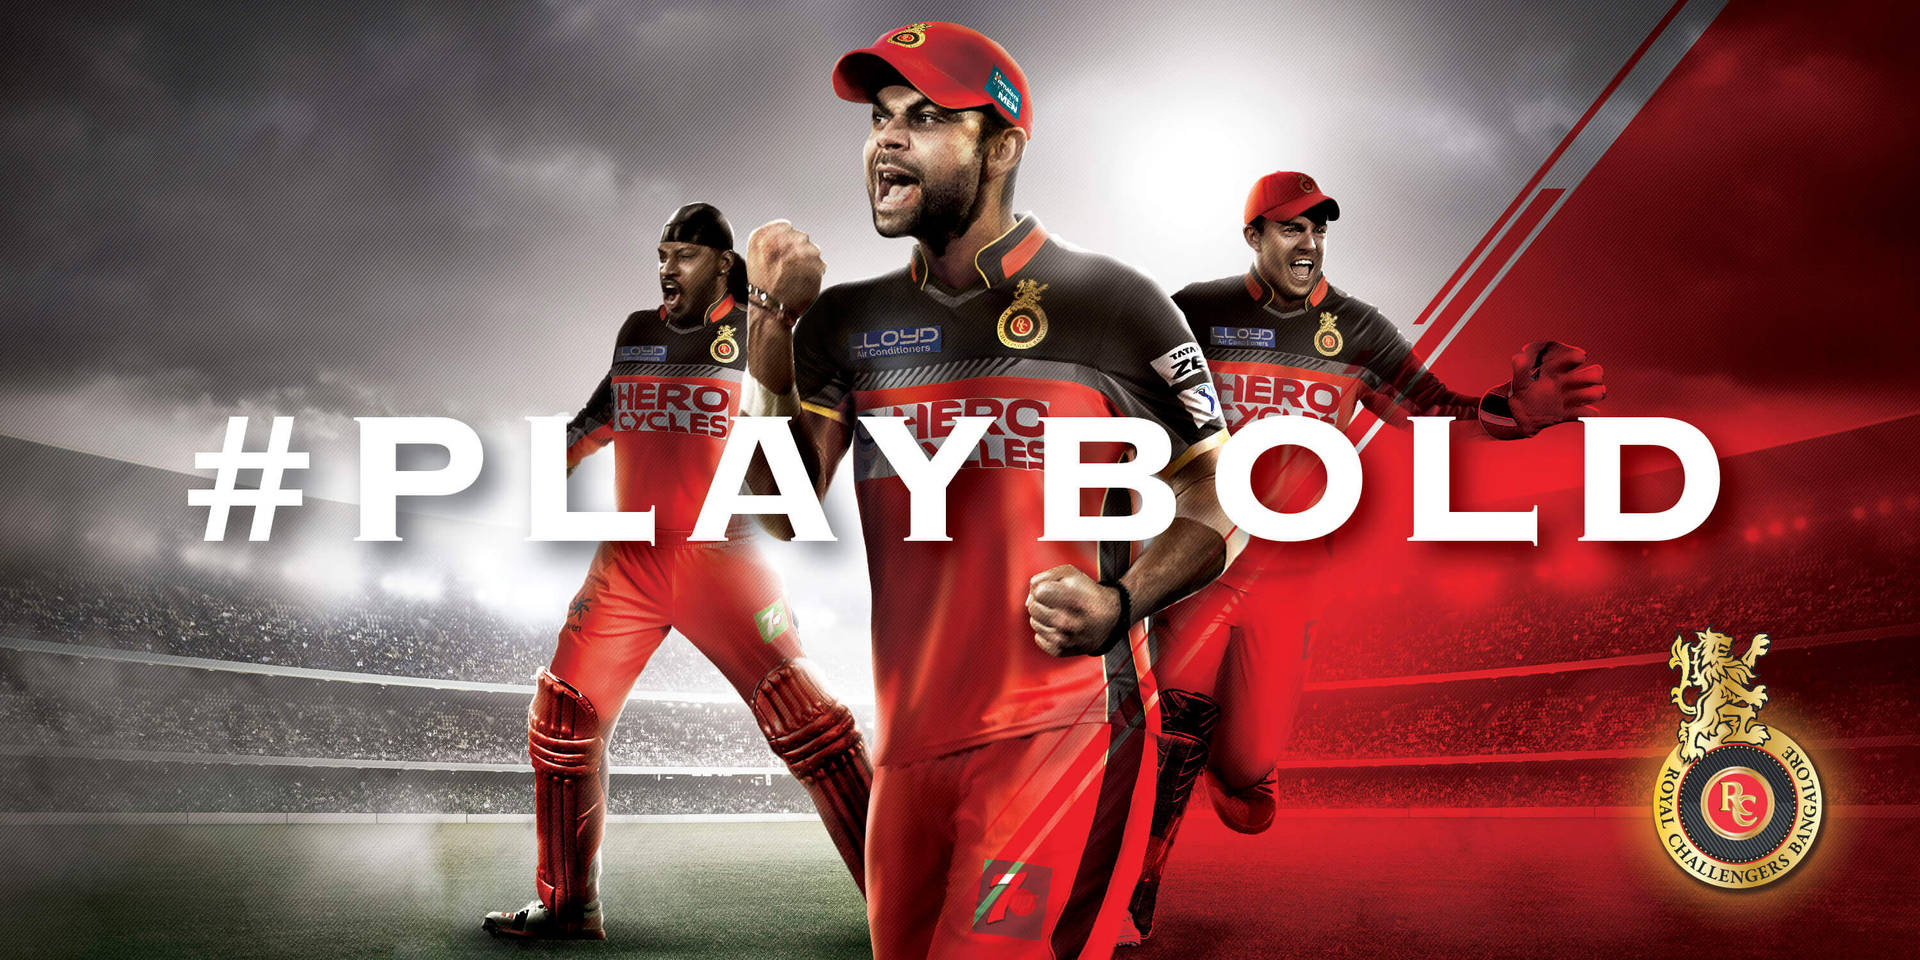 Rcb Team Play Bold Background